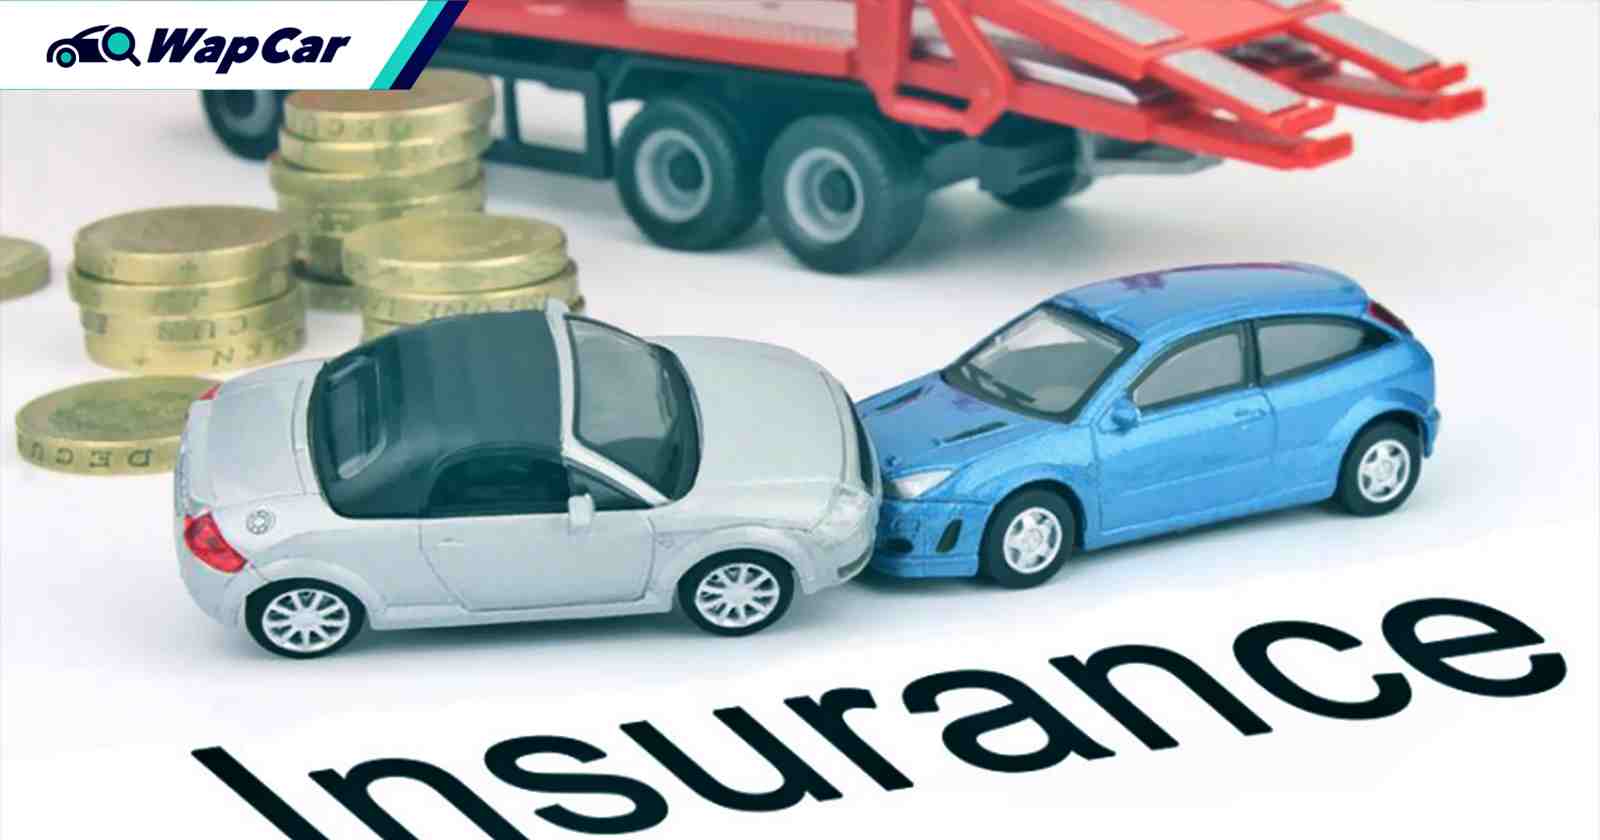 Post-liberalisation, this is why your car's insurance cost isn't coming down, yet 01